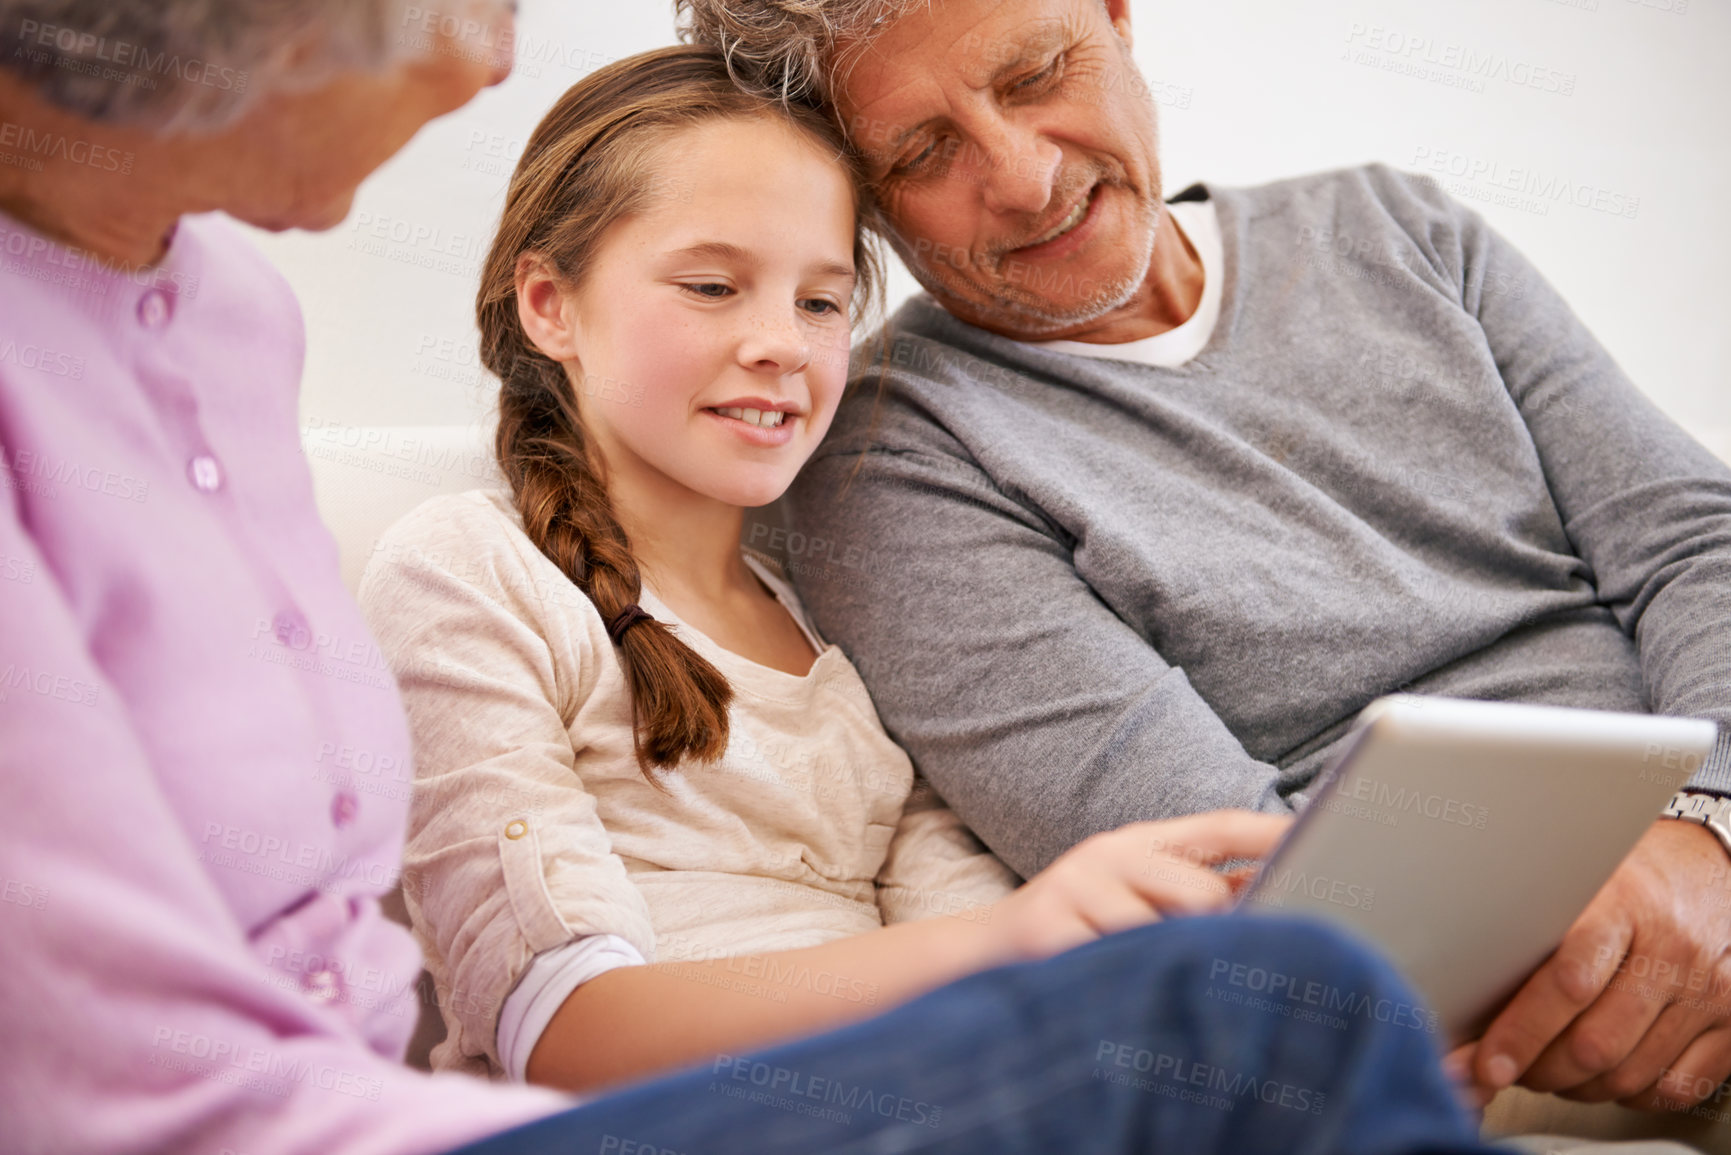 Buy stock photo Shot of grandparents watching their granddaughter use a digital tablet